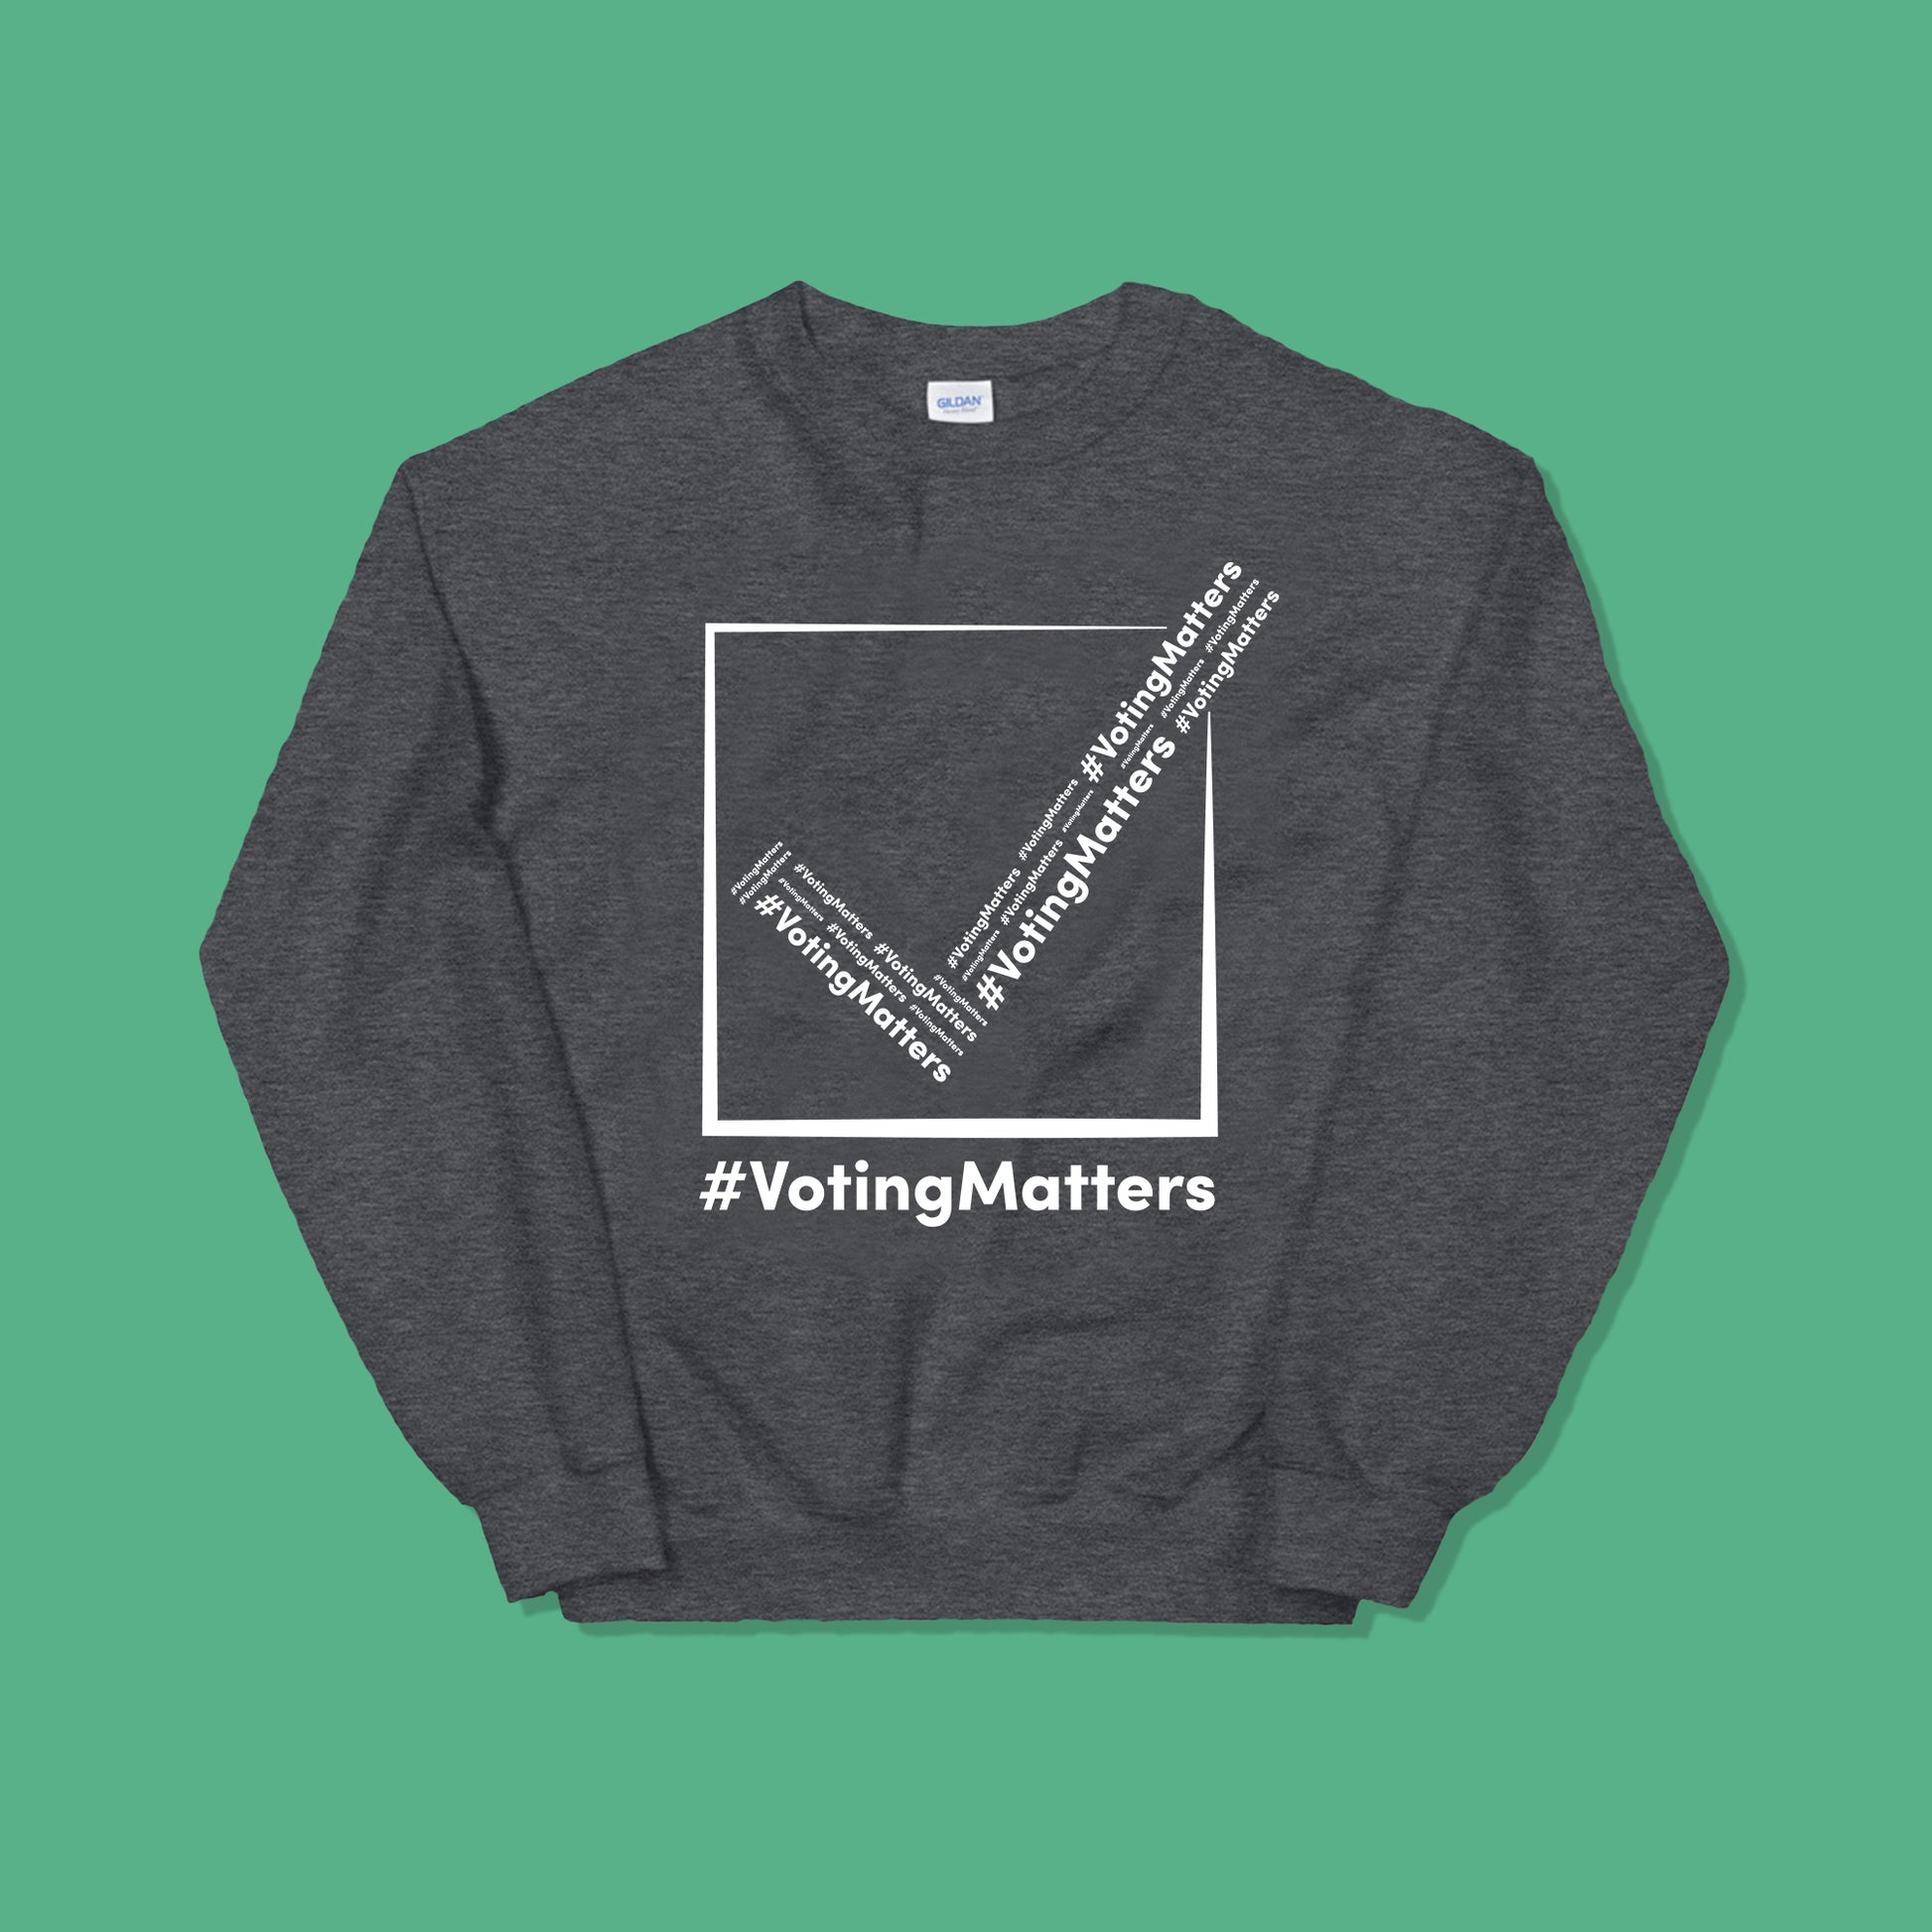 dark grey sweatshirt with hashtag voting matters logo on it with white lettering